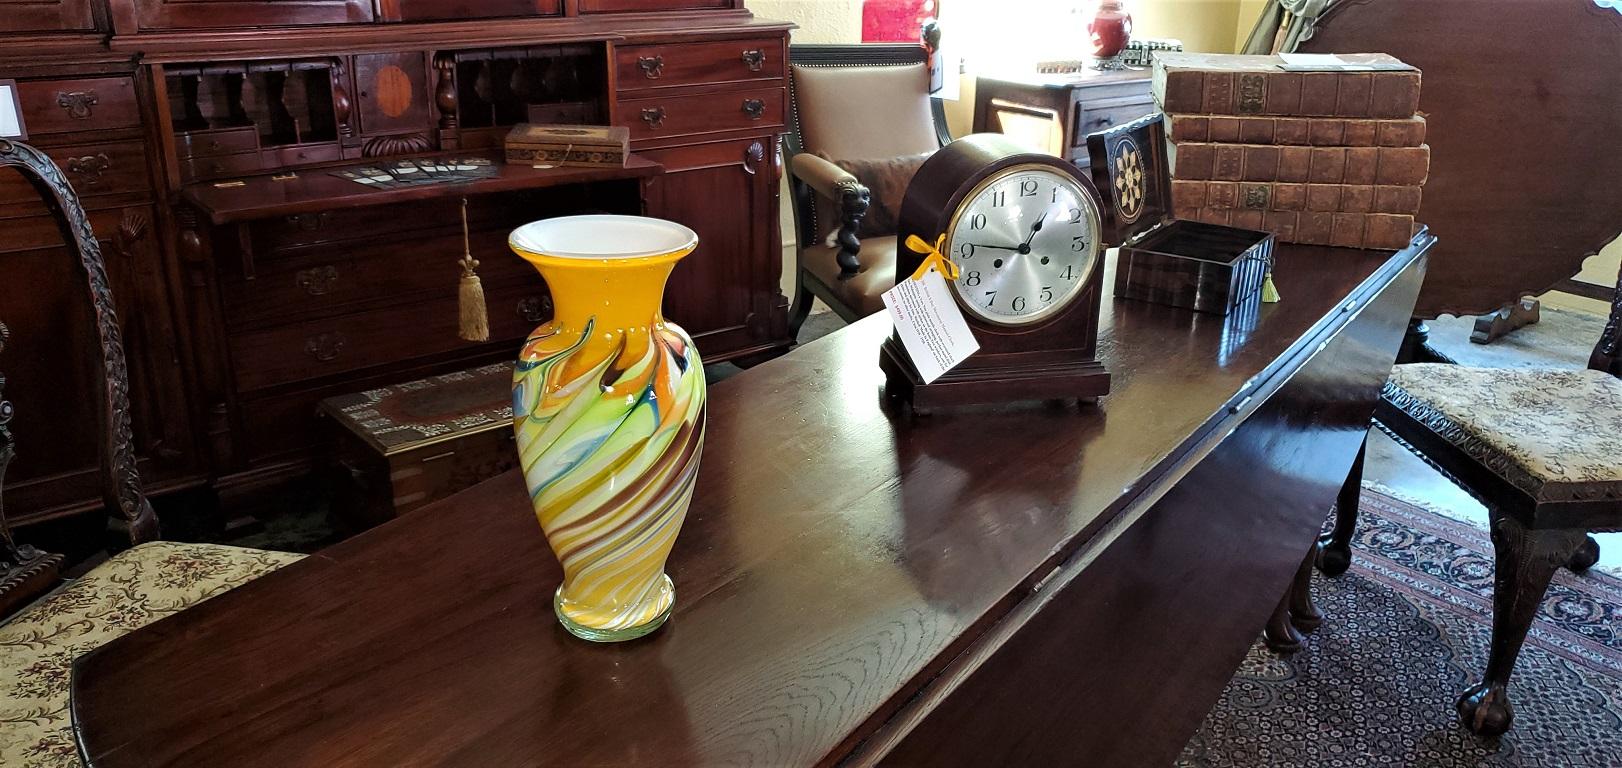 Lovely medium sized Murano glass vase from Murano, Venice, Italy.

20th century, circa 1960.

Midcentury in style.

Gorgeous hand blown piece with yellow color with hand blown swirls of blue, green, yellow and orange hues.

Unfortunately, it